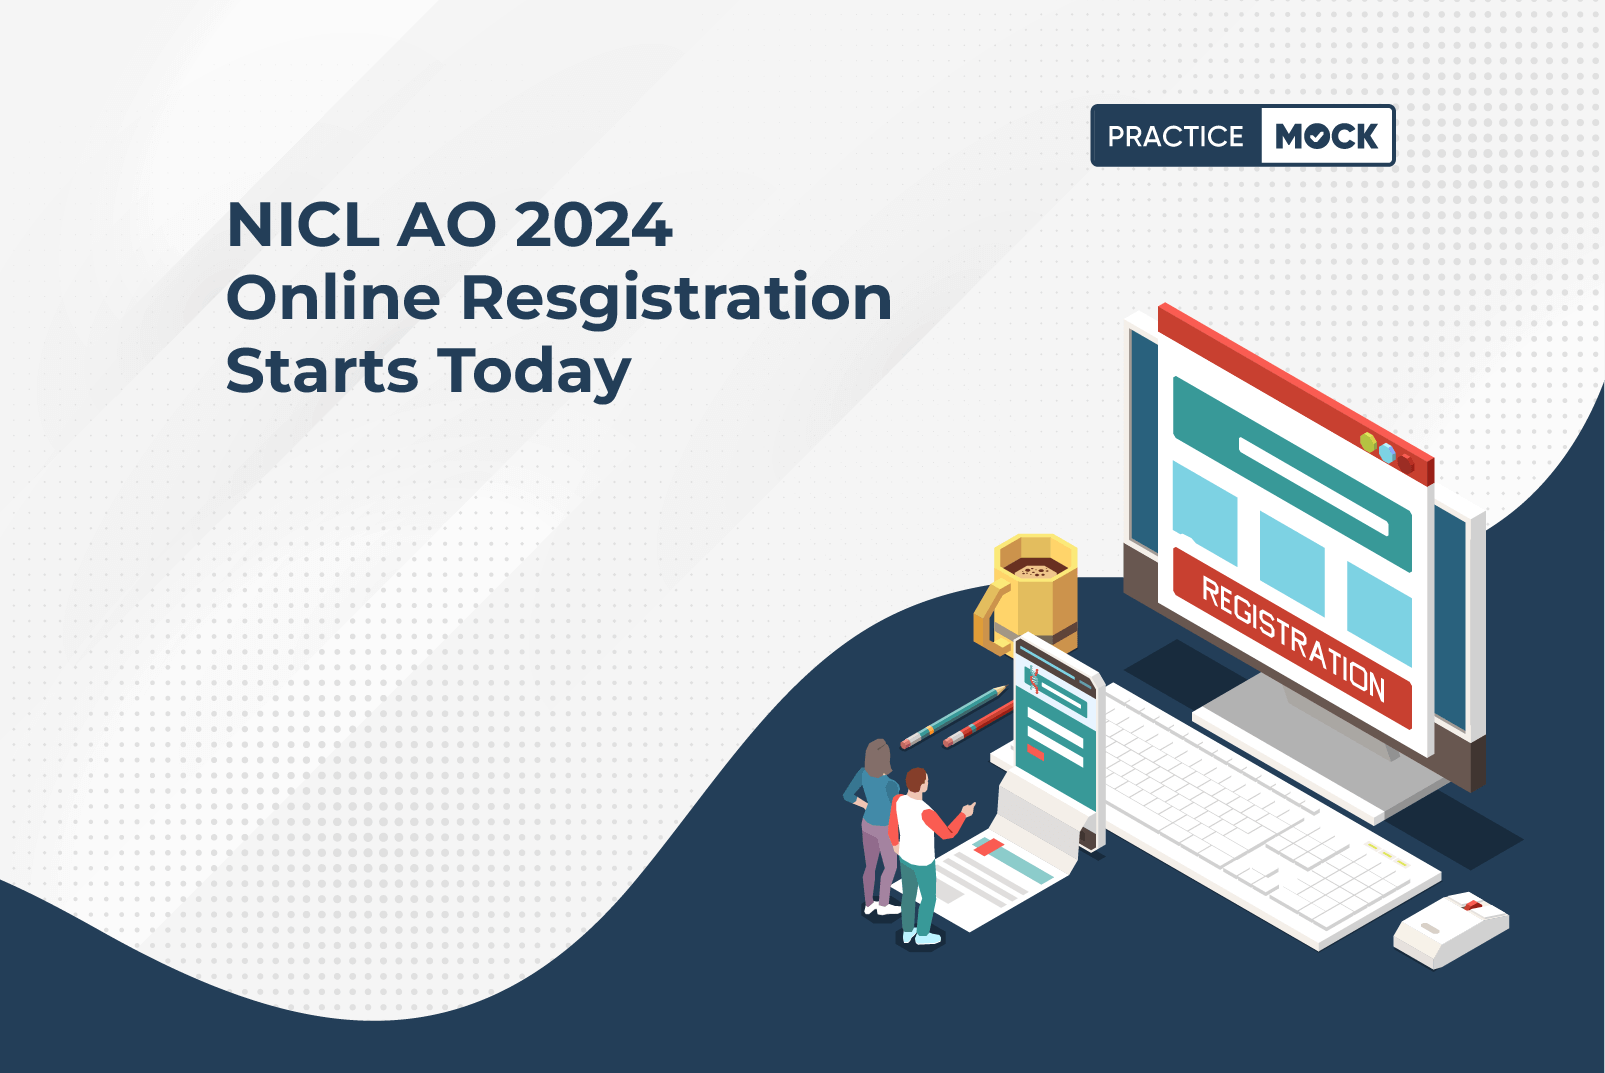 NICL AO 2024 Online Resgistration Starts Today